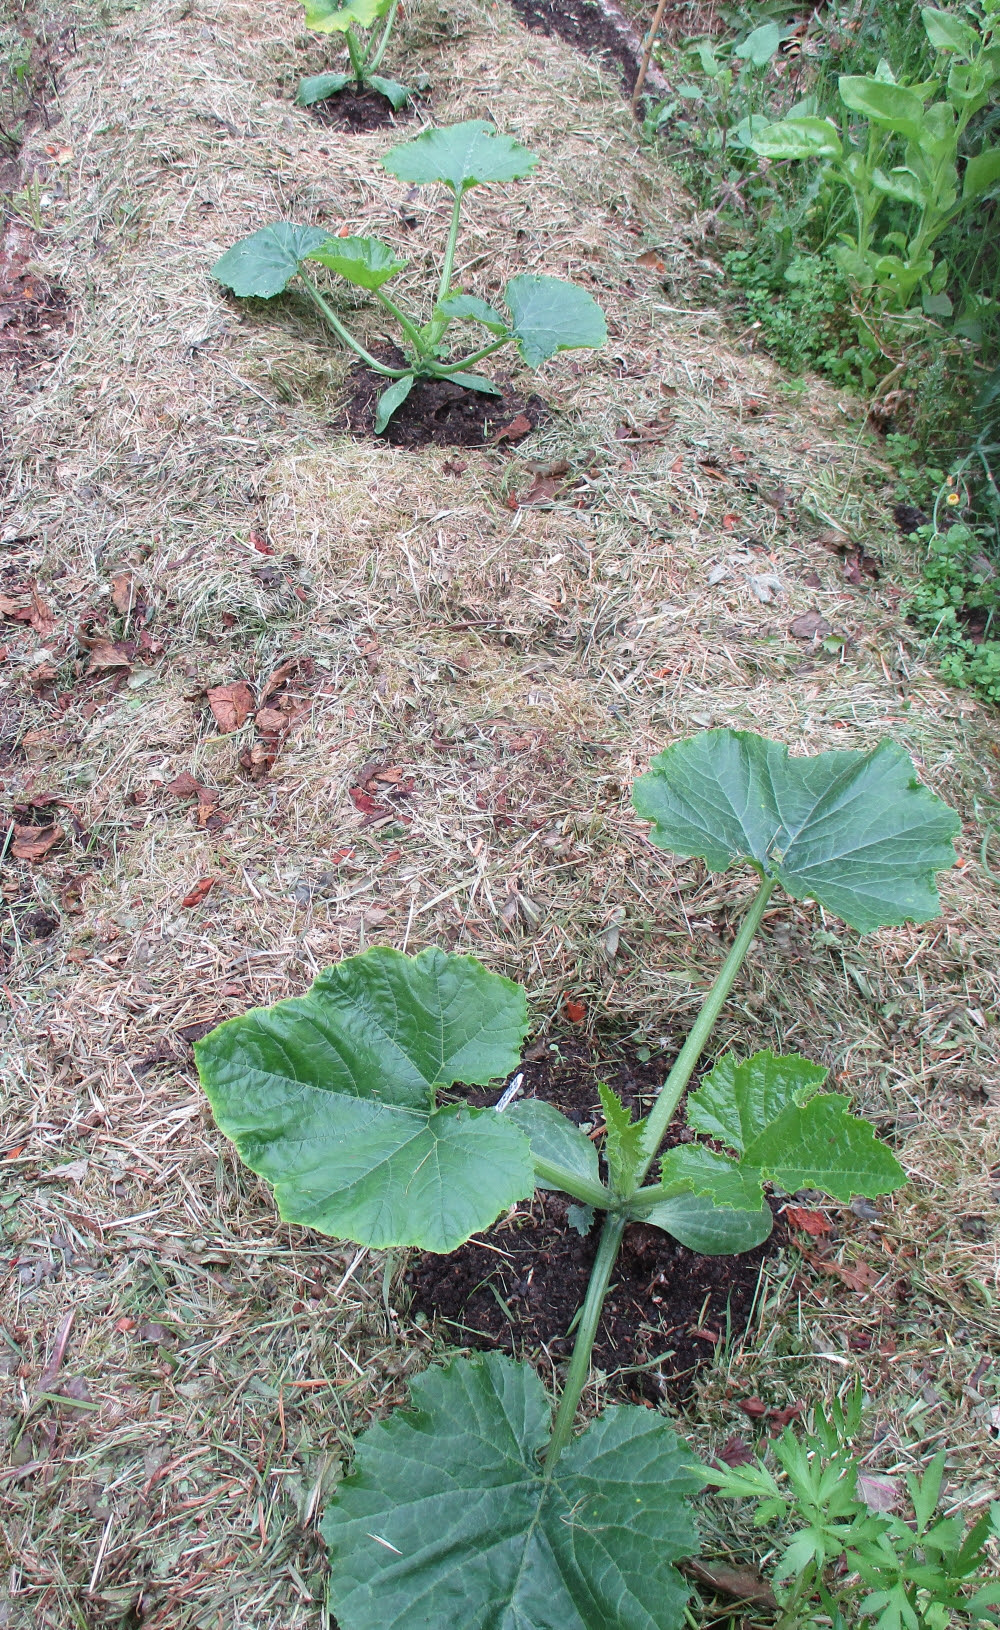 Courgette plants  mulched deeply with grass clippings kept a minimum of 10cm away from stems